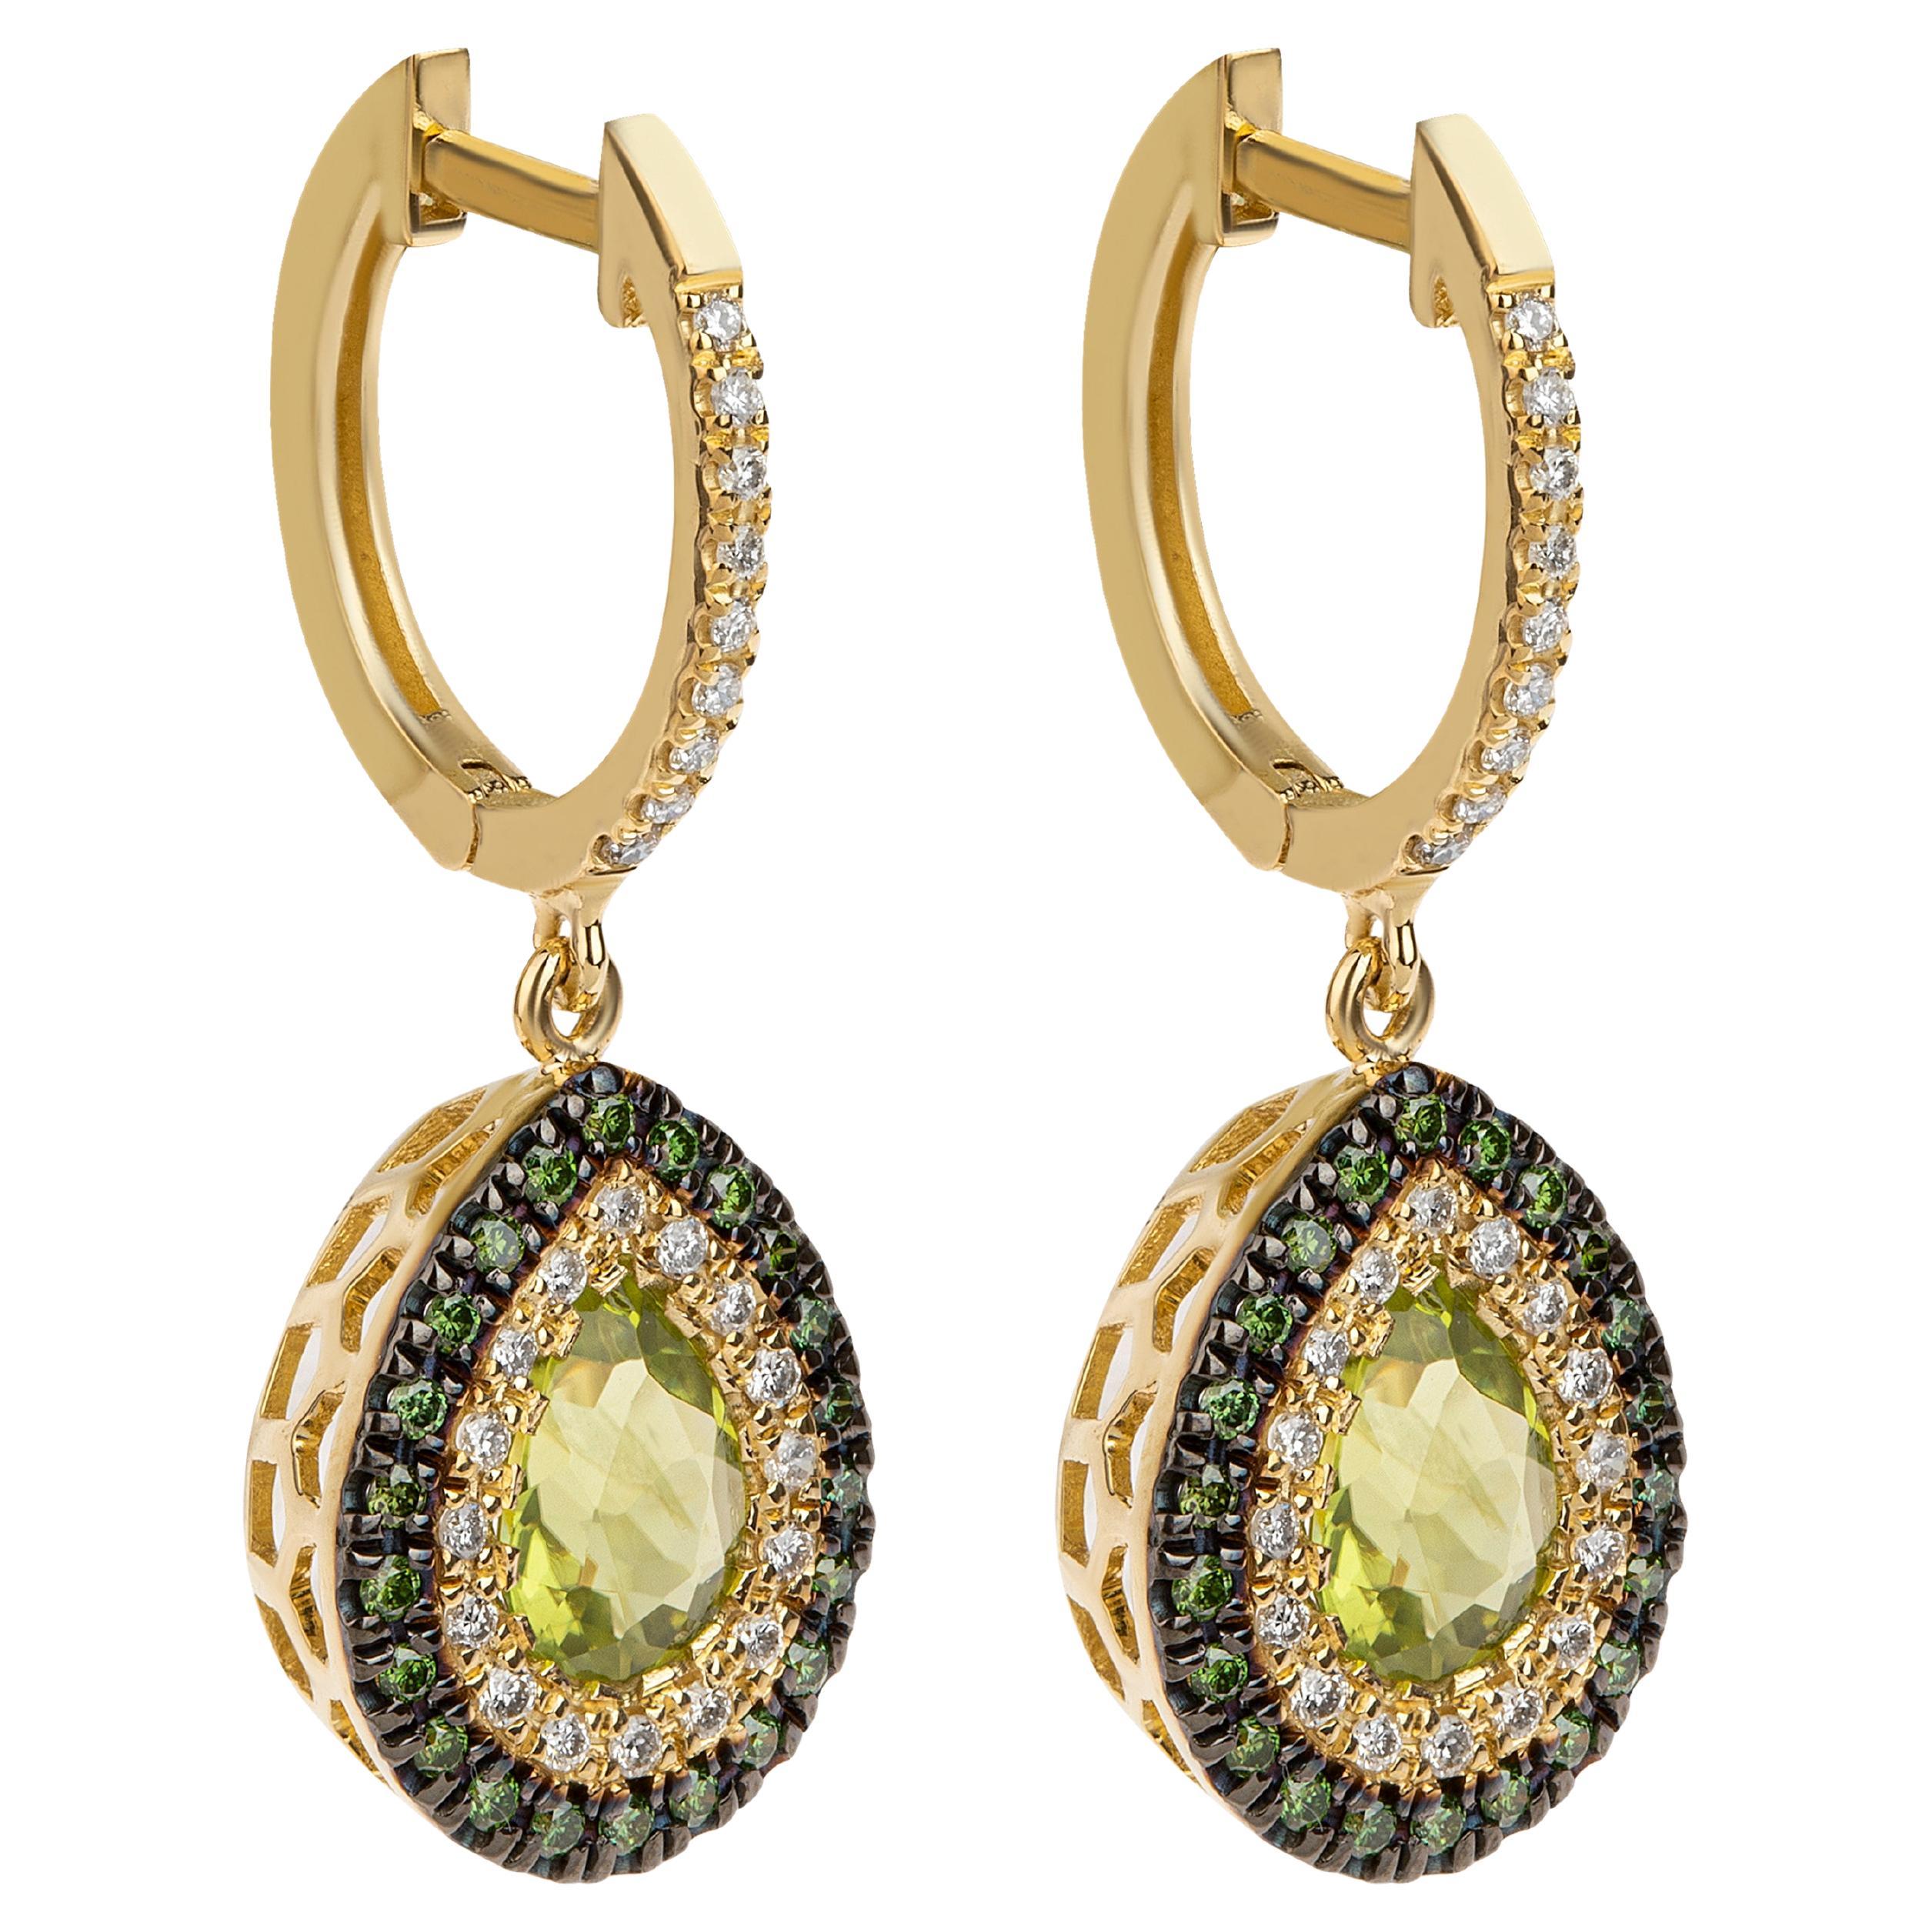 Peridot Pear Shape Earrings 18Kt Yellow Gold with Blue and White Pave Diamonds